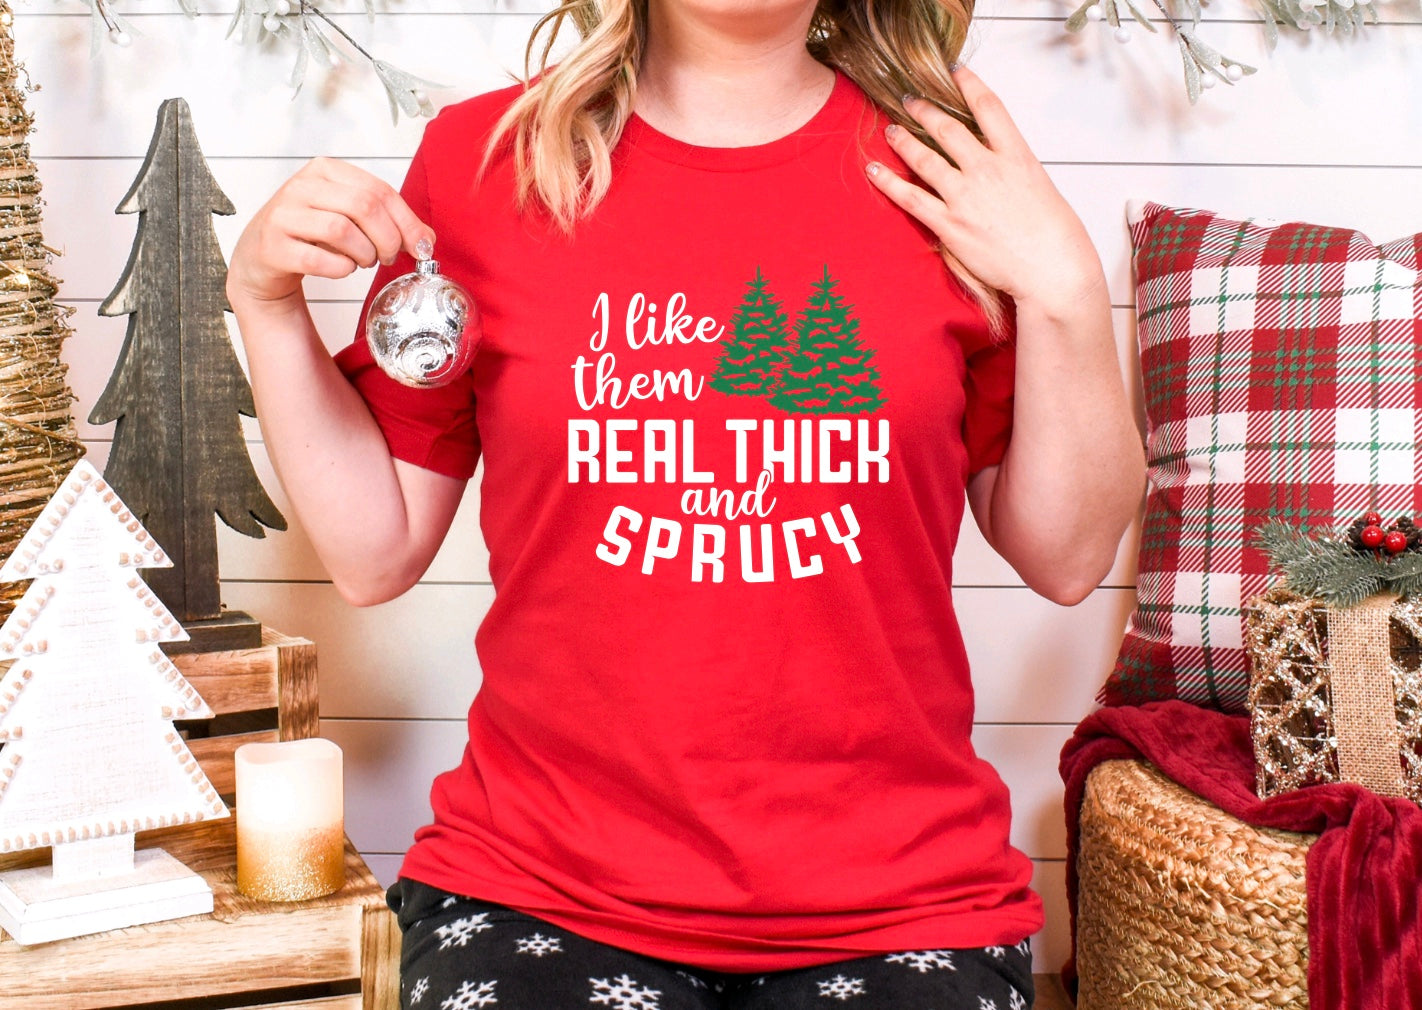 I like them real thick and sprucy unisex Christmas t-shirt for women in red